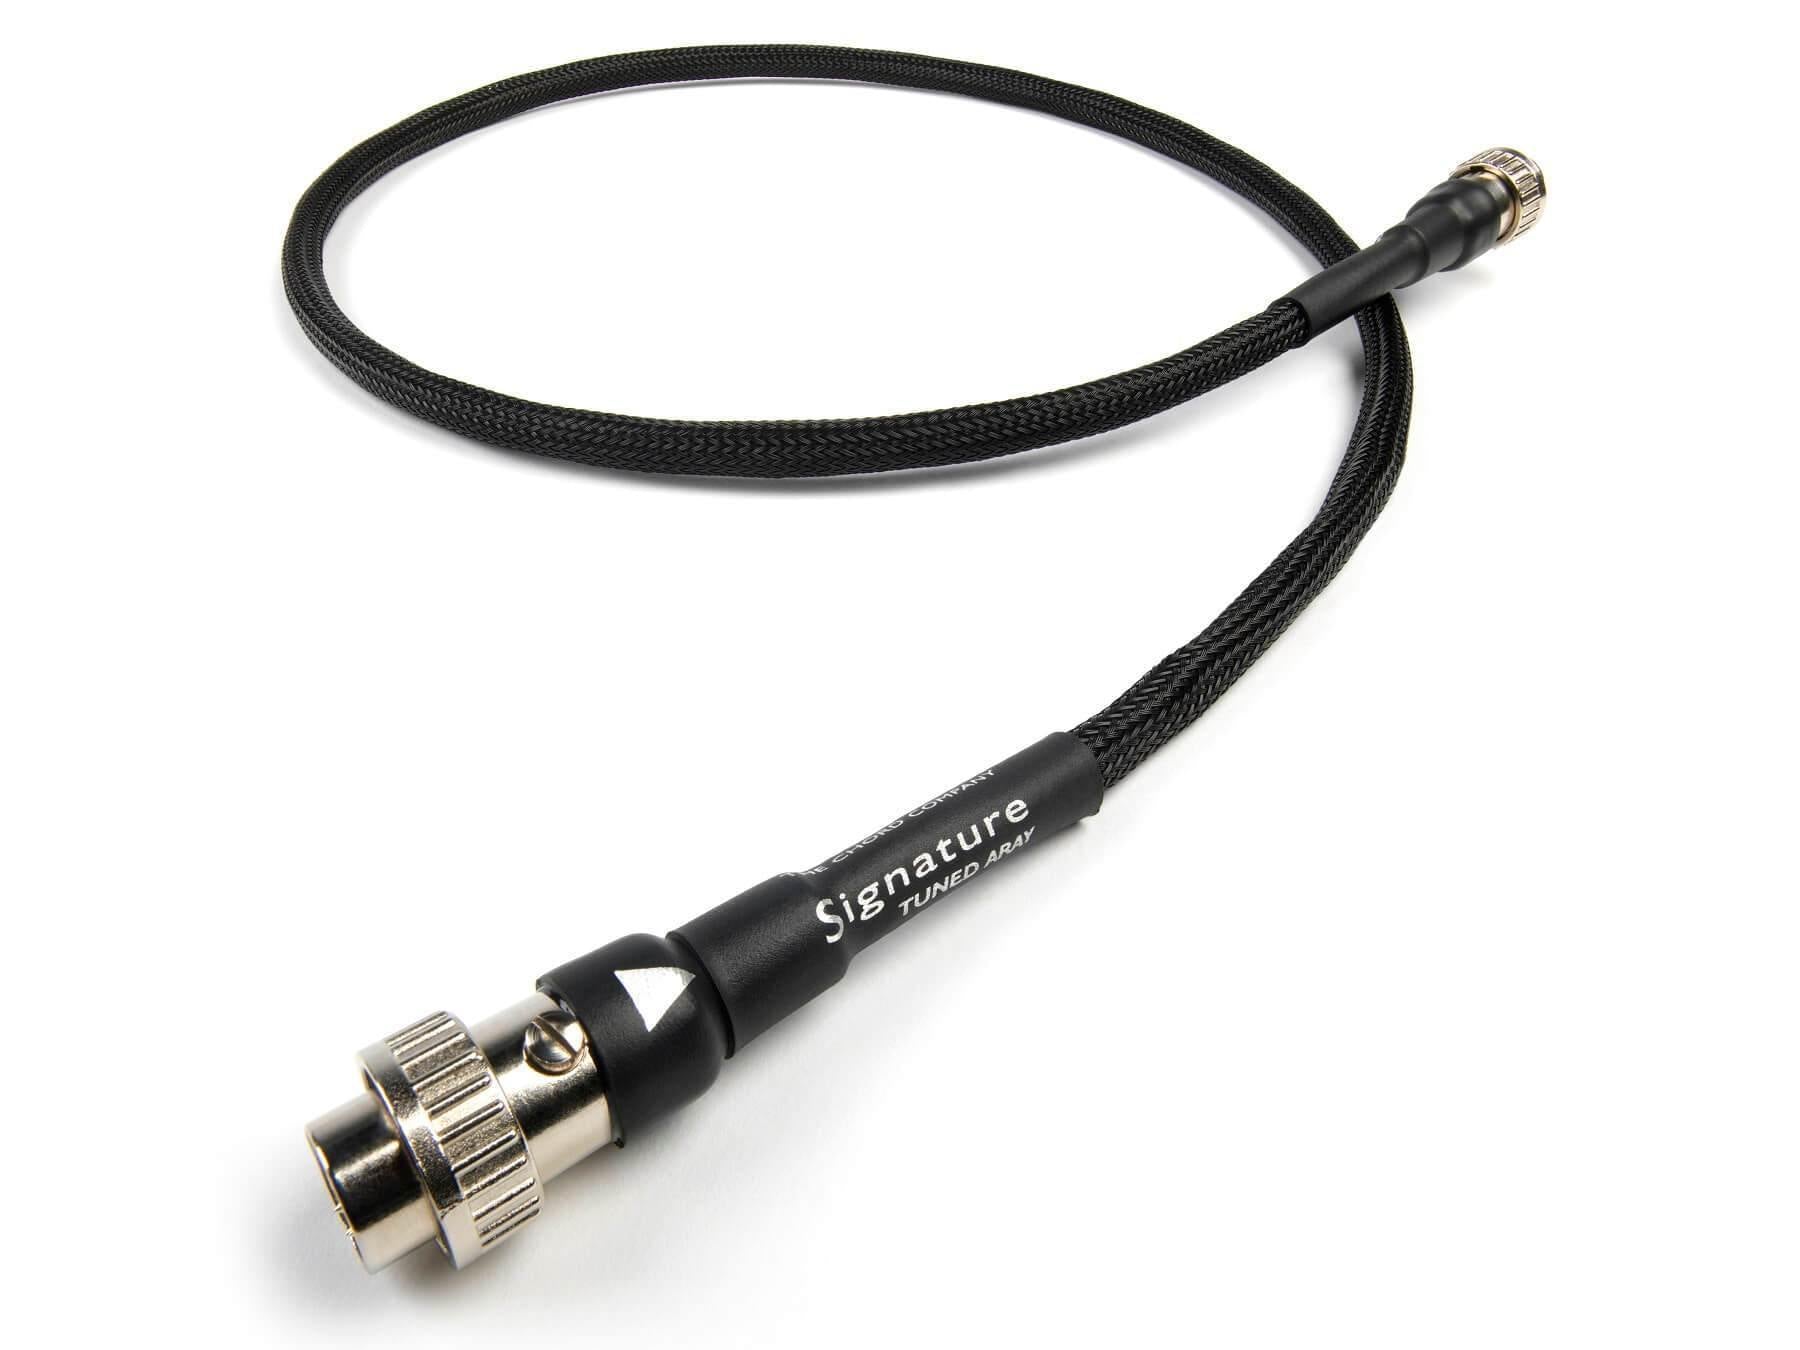 Chord Signature Tuned ARAY Analogue DIN Cable